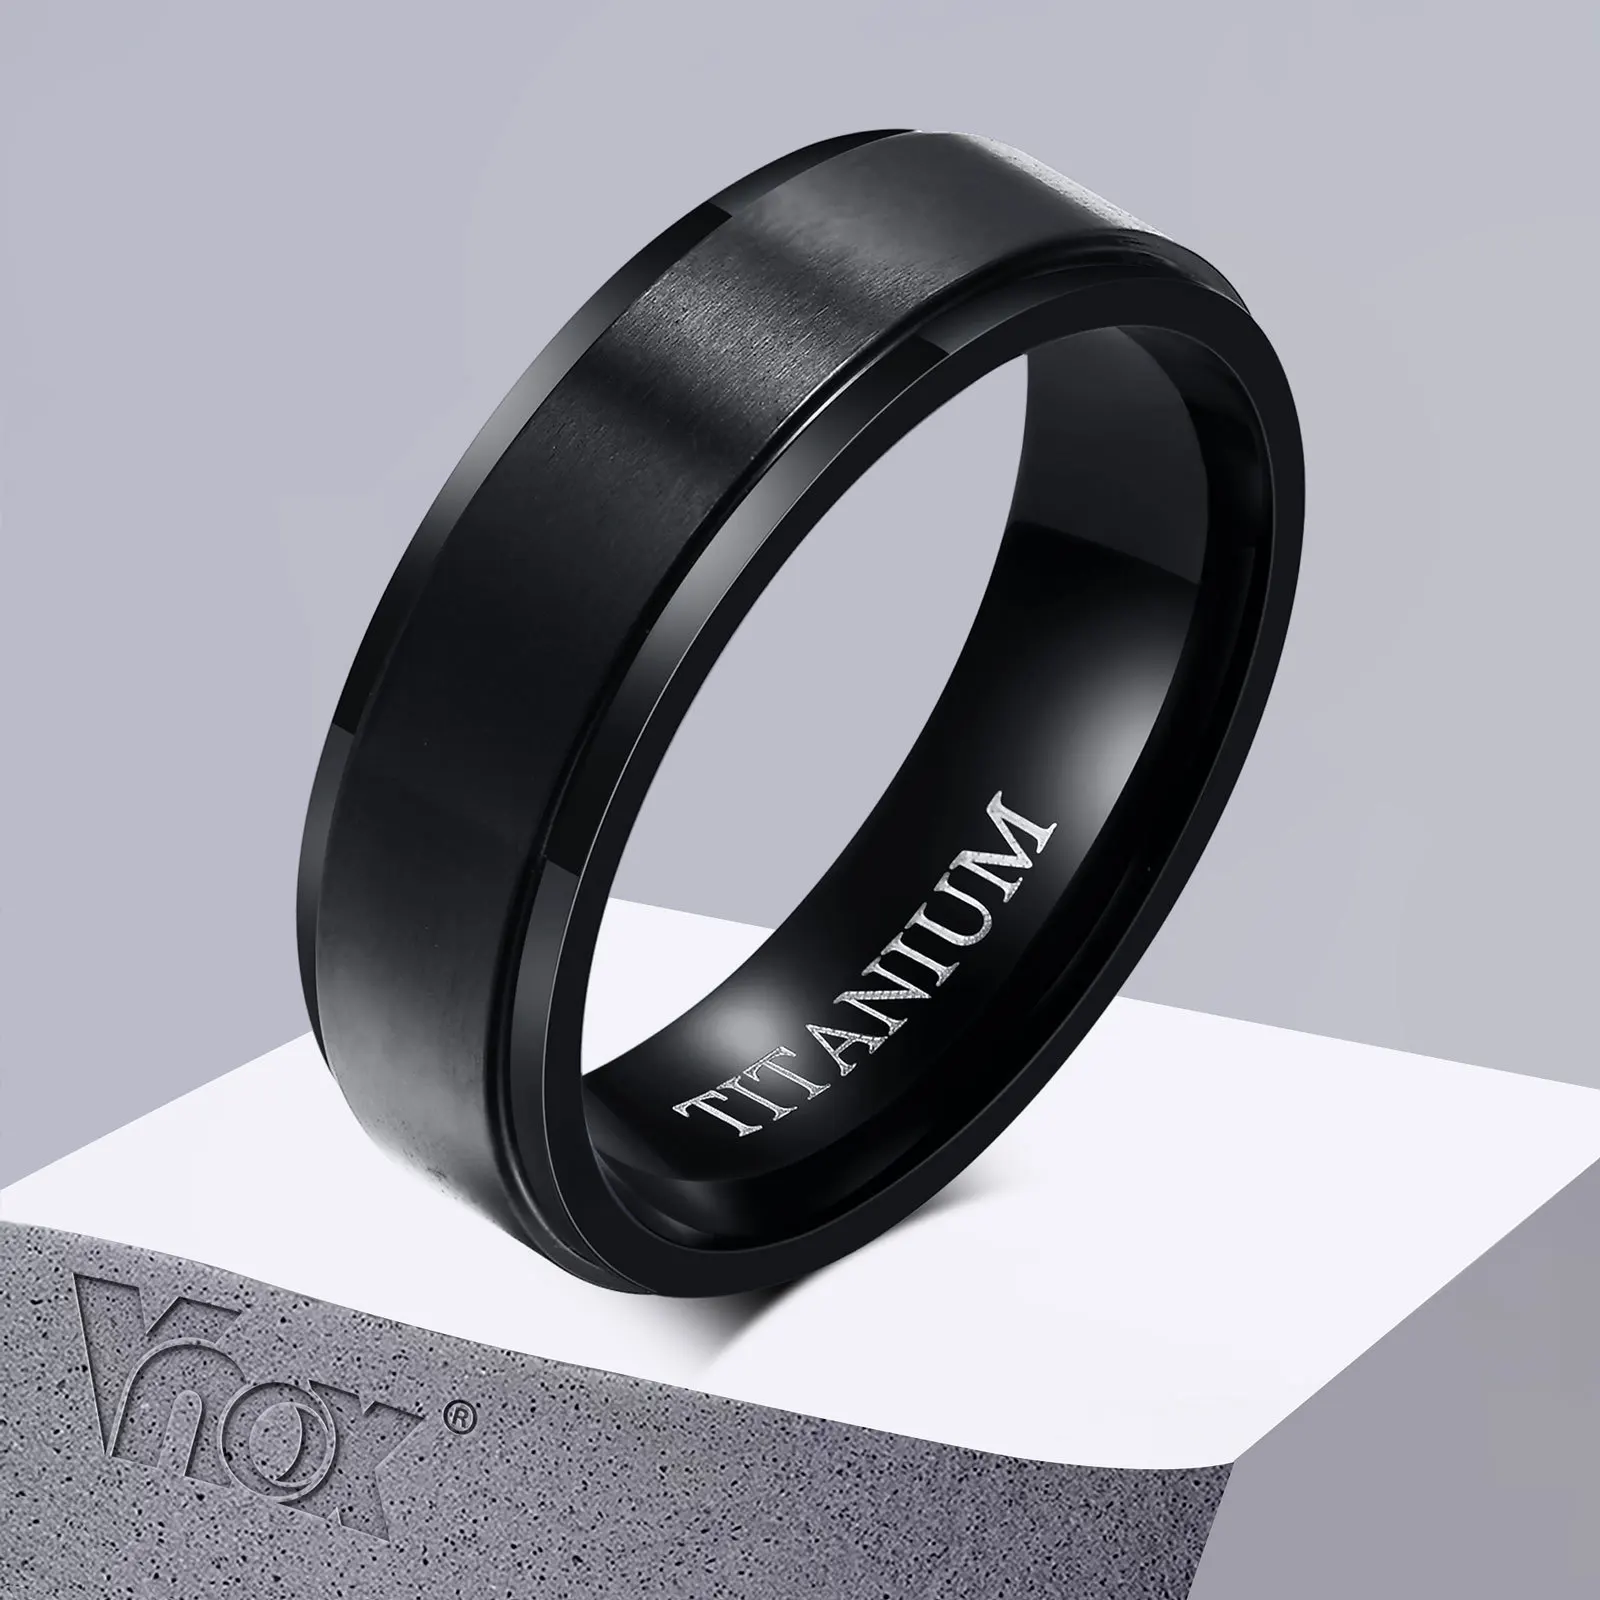 

Vnox Classic Wedding Band Rings for Men Jewelry, 6MM Wide Black Titanium Metal Finger Ring, Anniversary Gift, US Size